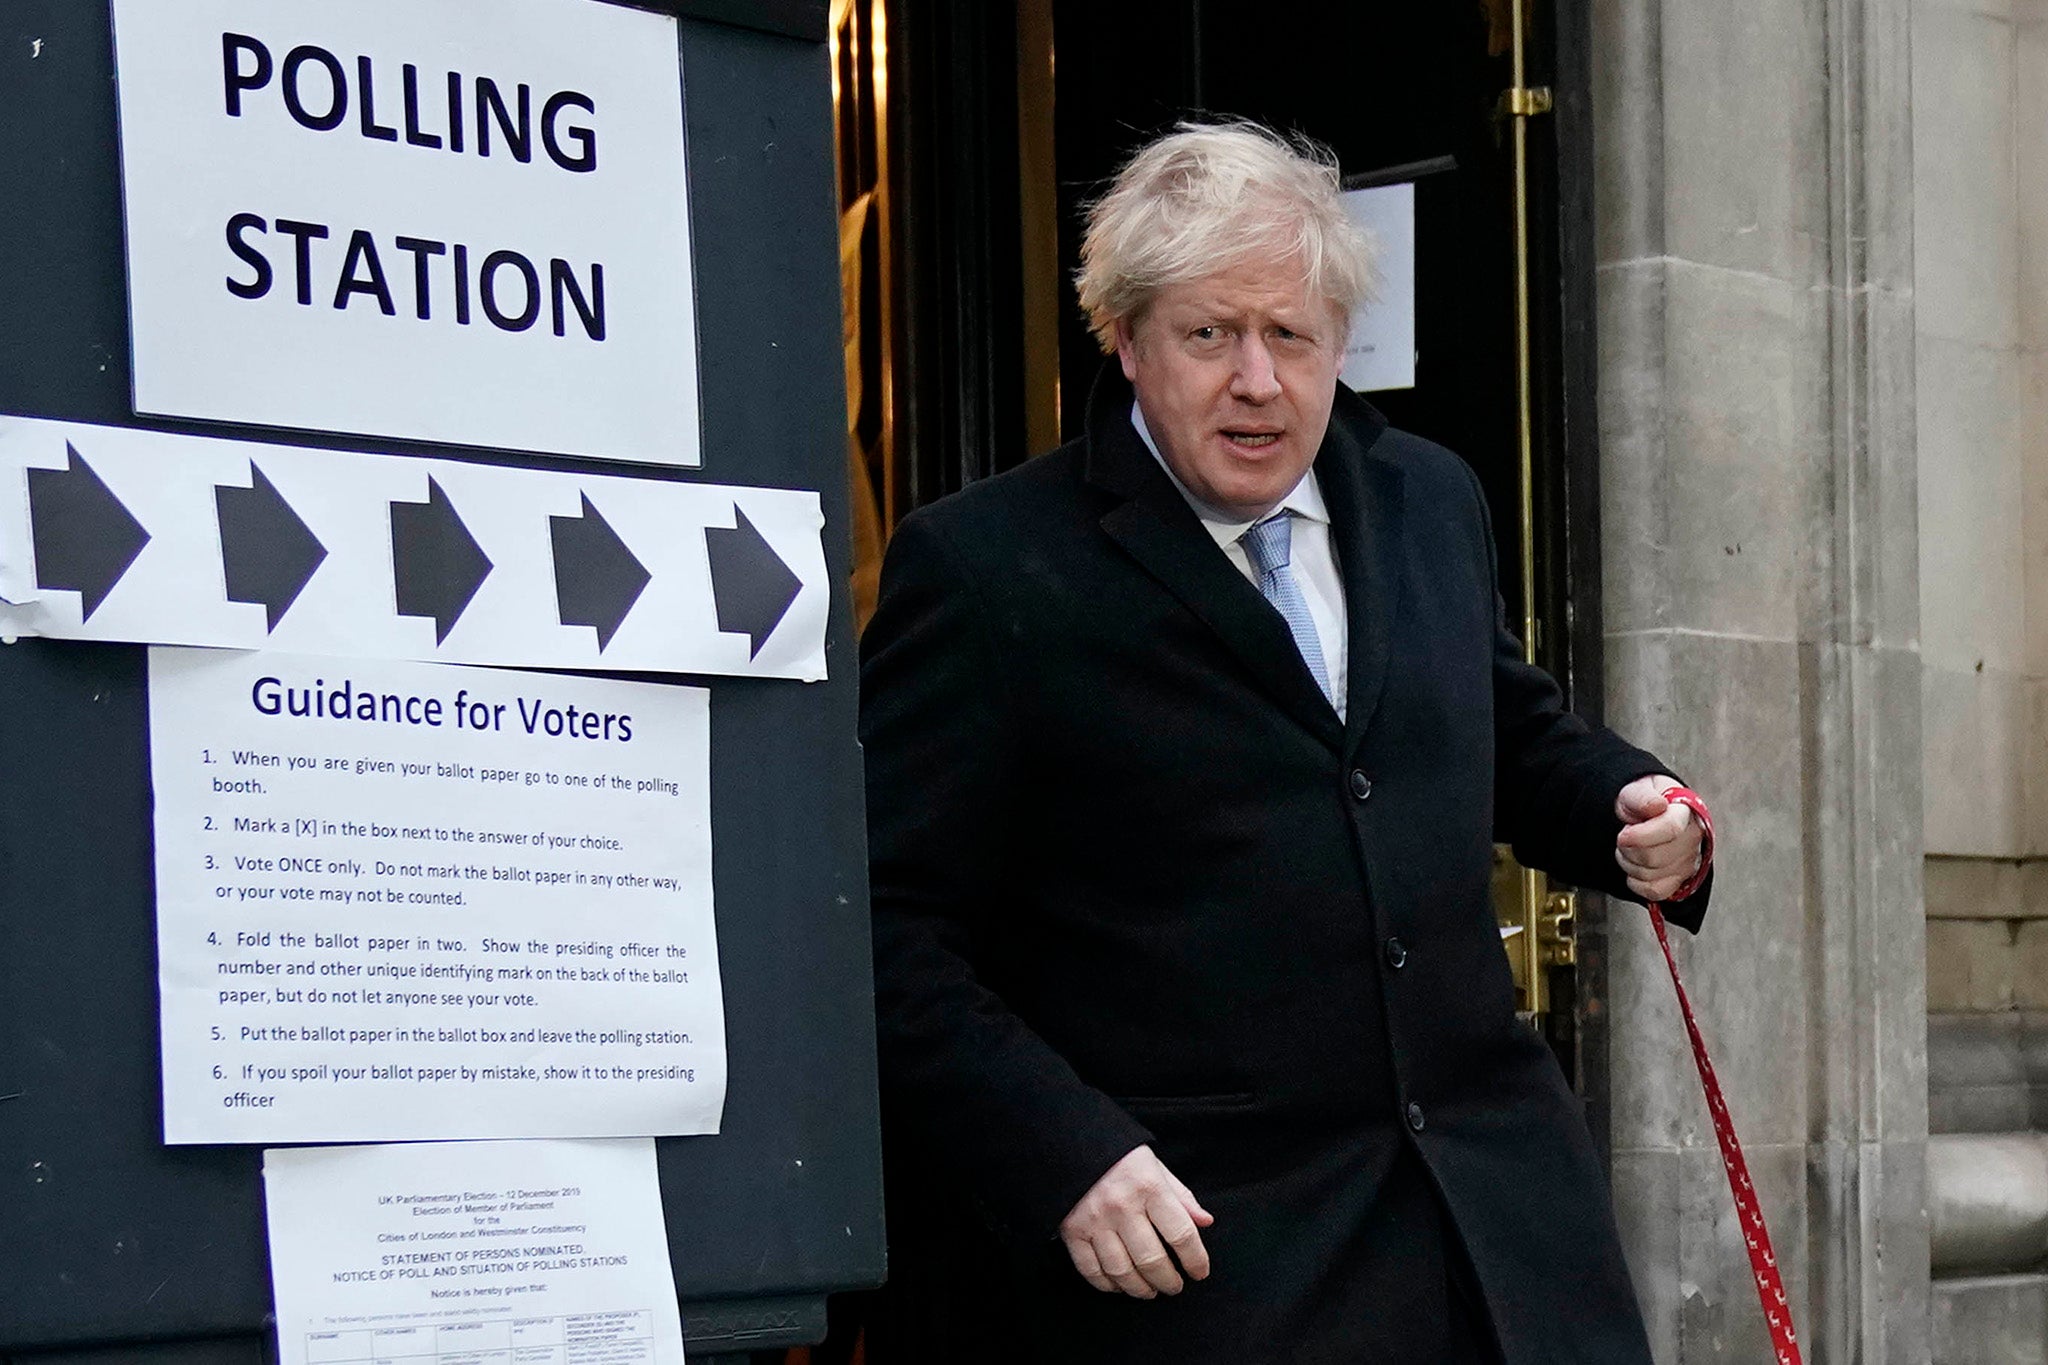 In 2019, Johnson did not need ID to vote but this time he apparently forgot about his own law